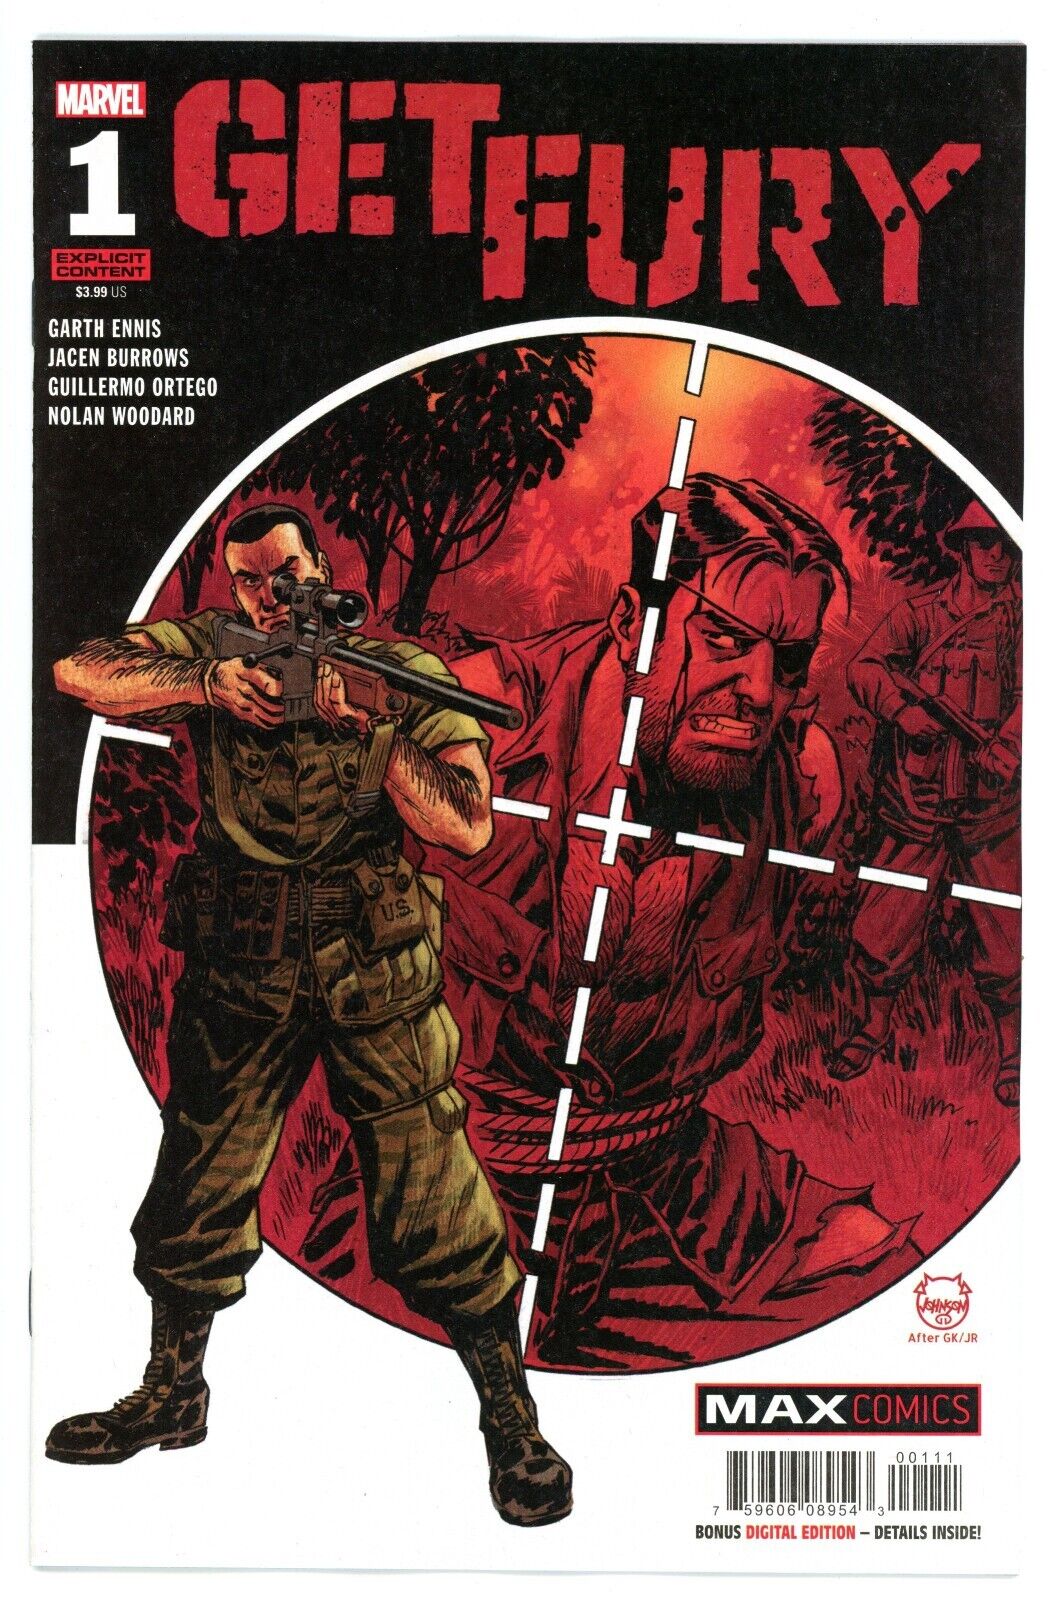 Get Fury #1  |  First Print  |   NM   NEW   🔥NO STOCK PHOTOS🔥